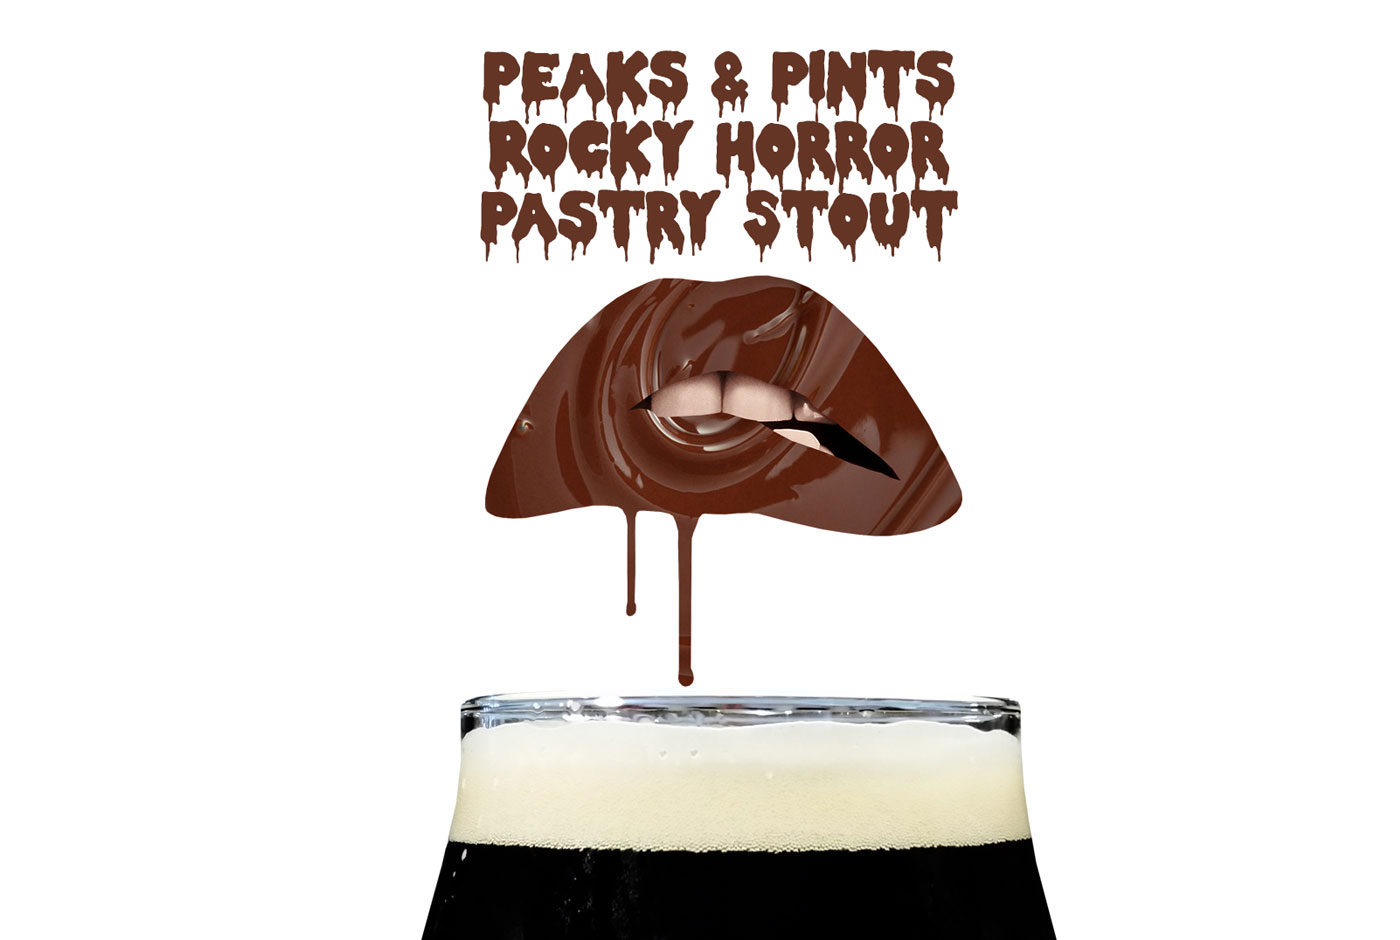 Peaks-and-Pints-Rocky-Horror-Pastry-Stout-calendar